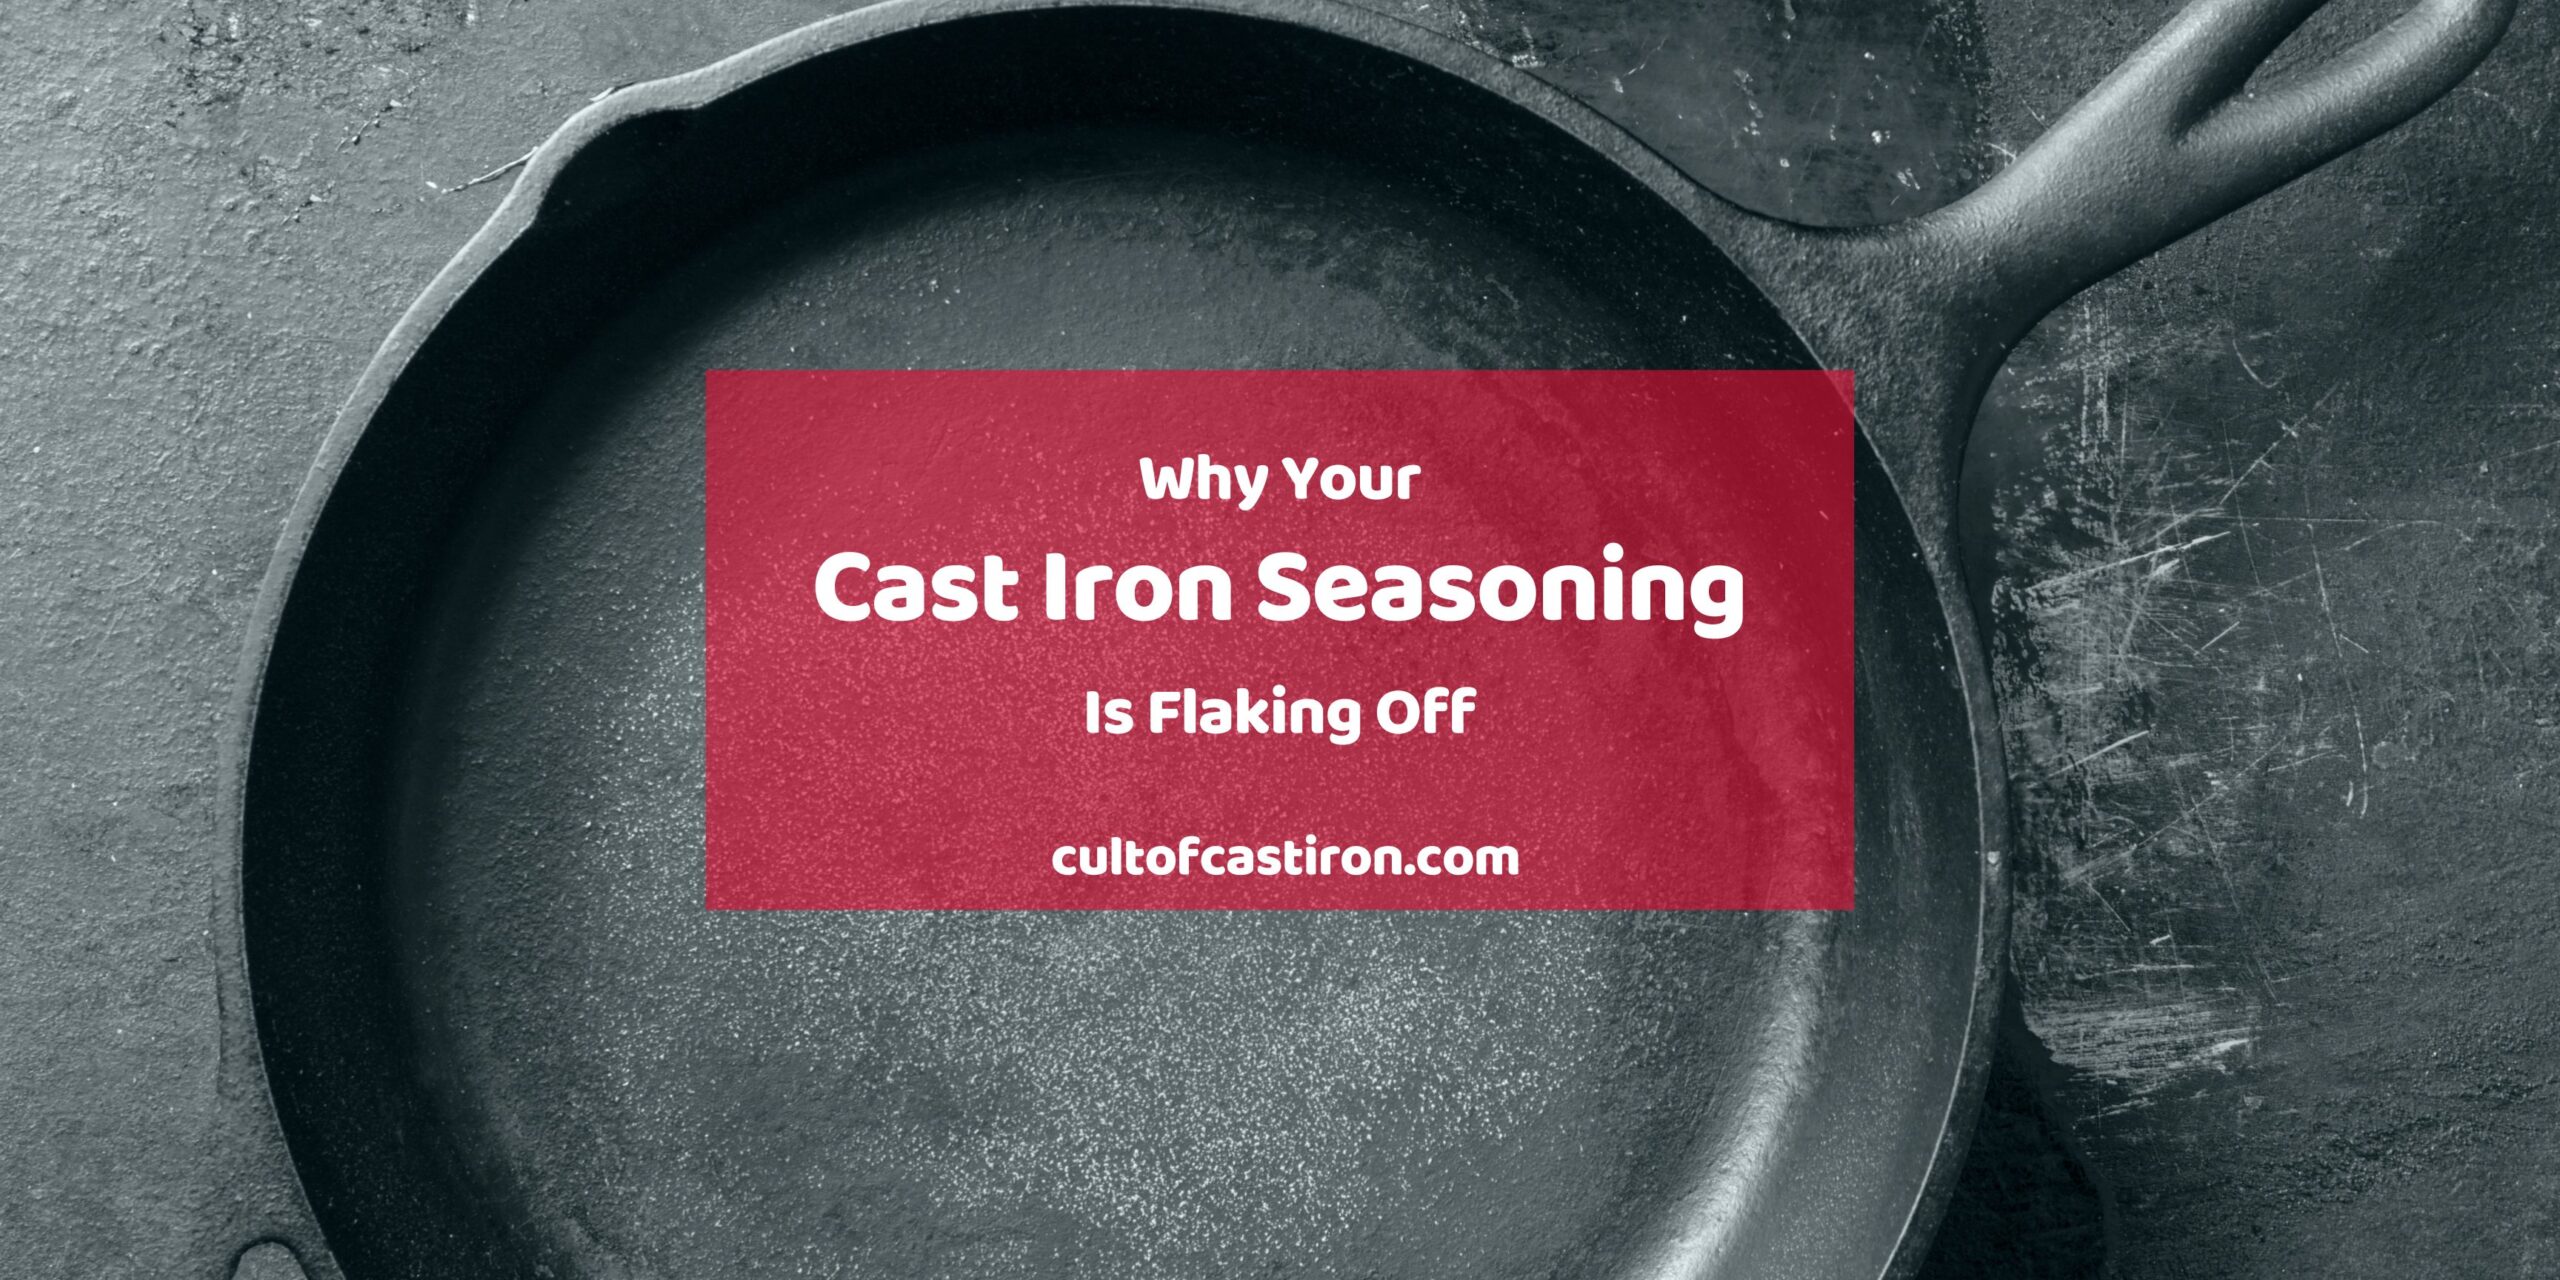 https://cultofcastiron.com/wp-content/uploads/2023/04/Why-Your-Cast-Iron-Seasoning-is-Flaking-The-Root-Causes-Fixes-scaled.jpg